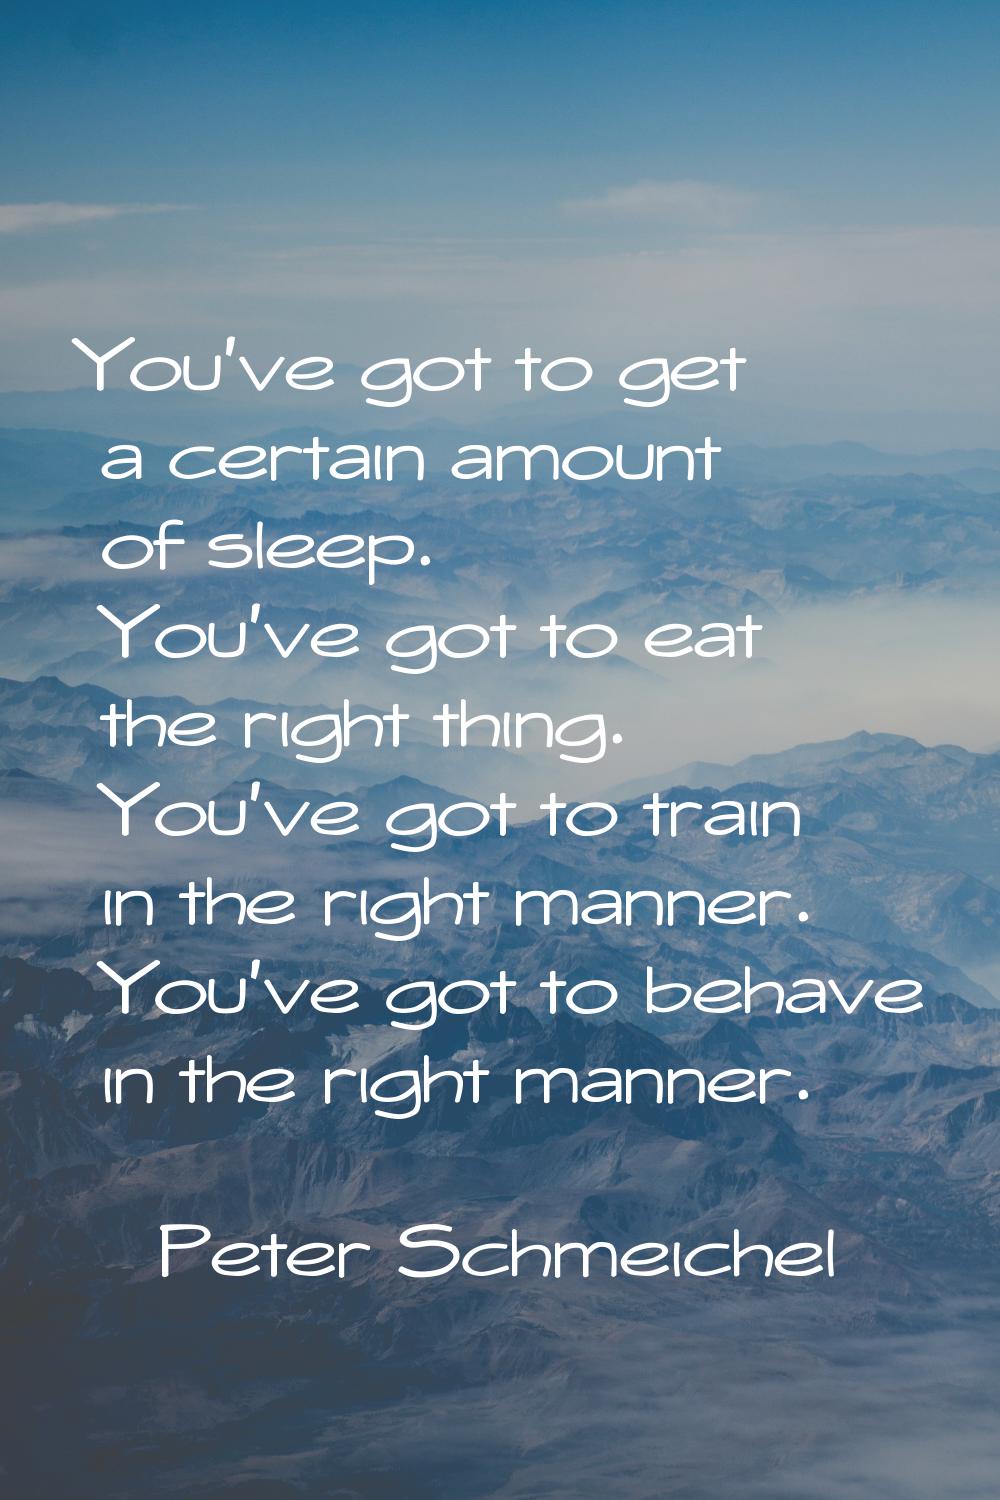 You've got to get a certain amount of sleep. You've got to eat the right thing. You've got to train